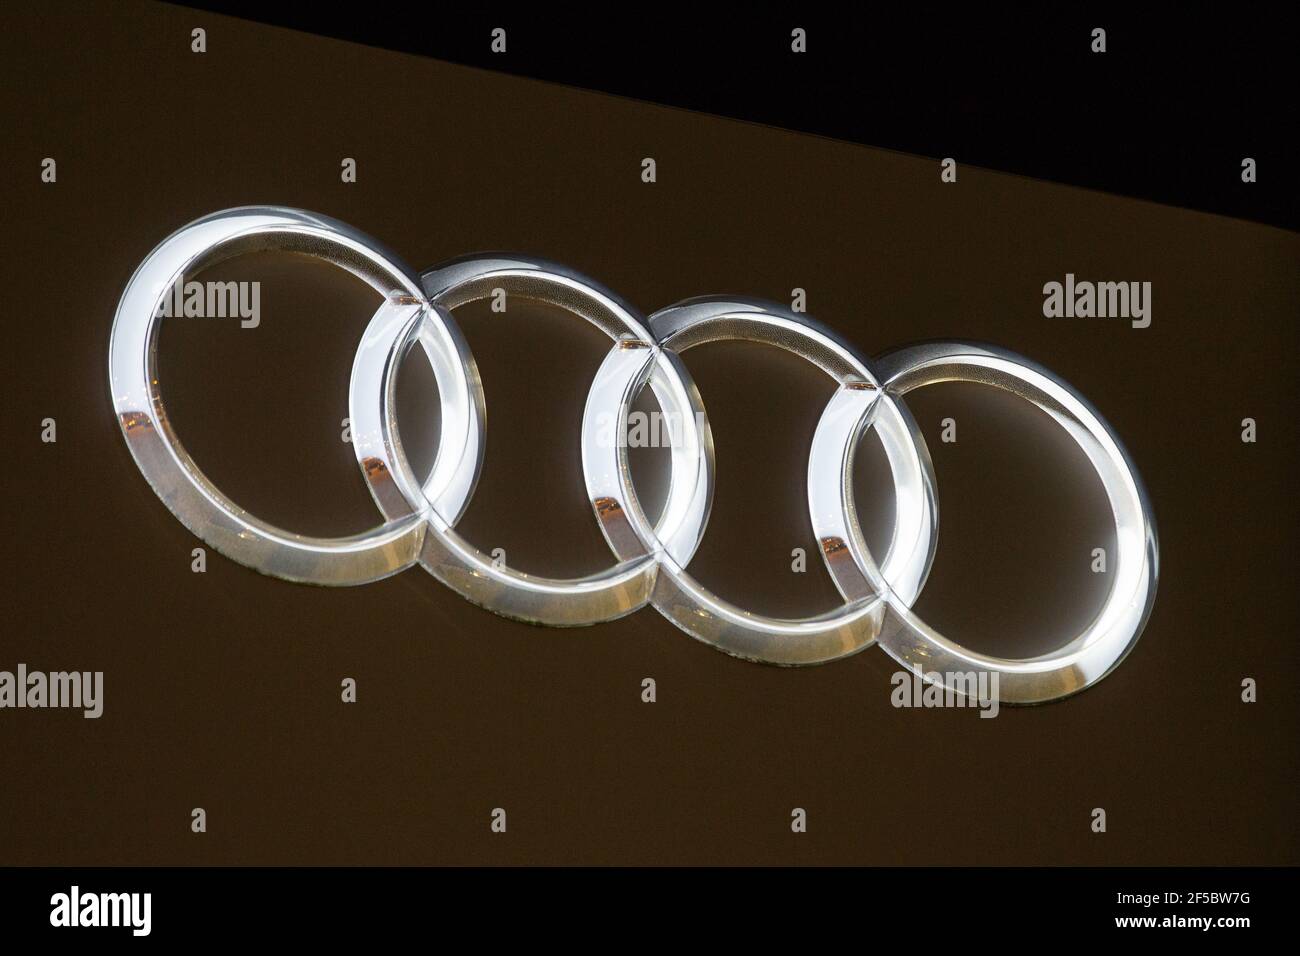 Lubin, Lower Silesia, Poland. 29th Dec, 2020. A view of the Audi brand logo on the Audi showroom in Lubin. Credit: Karol Serewis/SOPA Images/ZUMA Wire/Alamy Live News Stock Photo